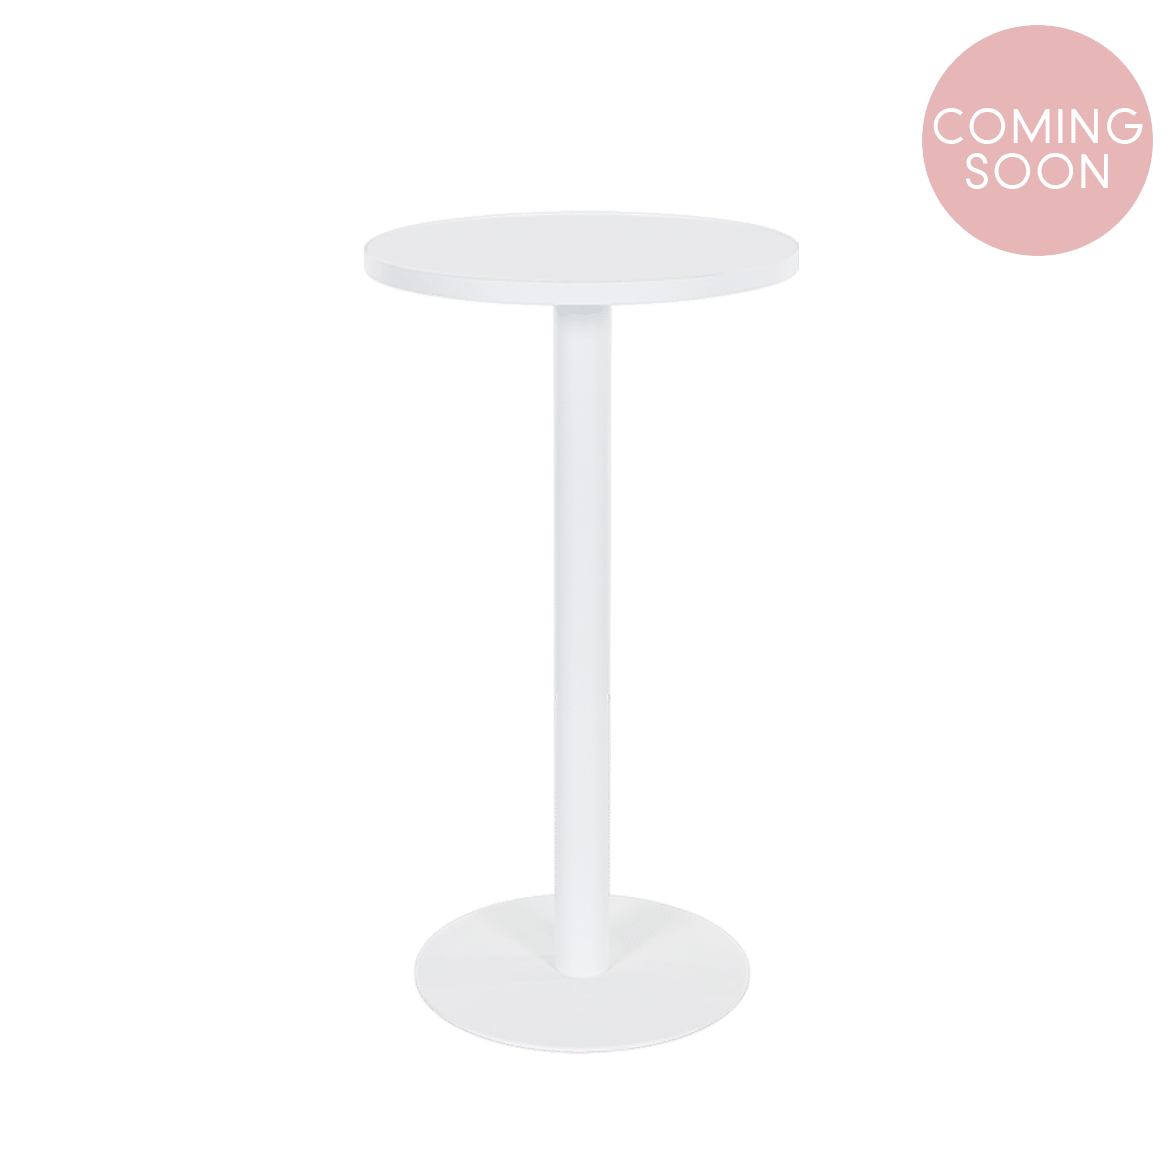 Cocktail Round Dry Bar Table Hire